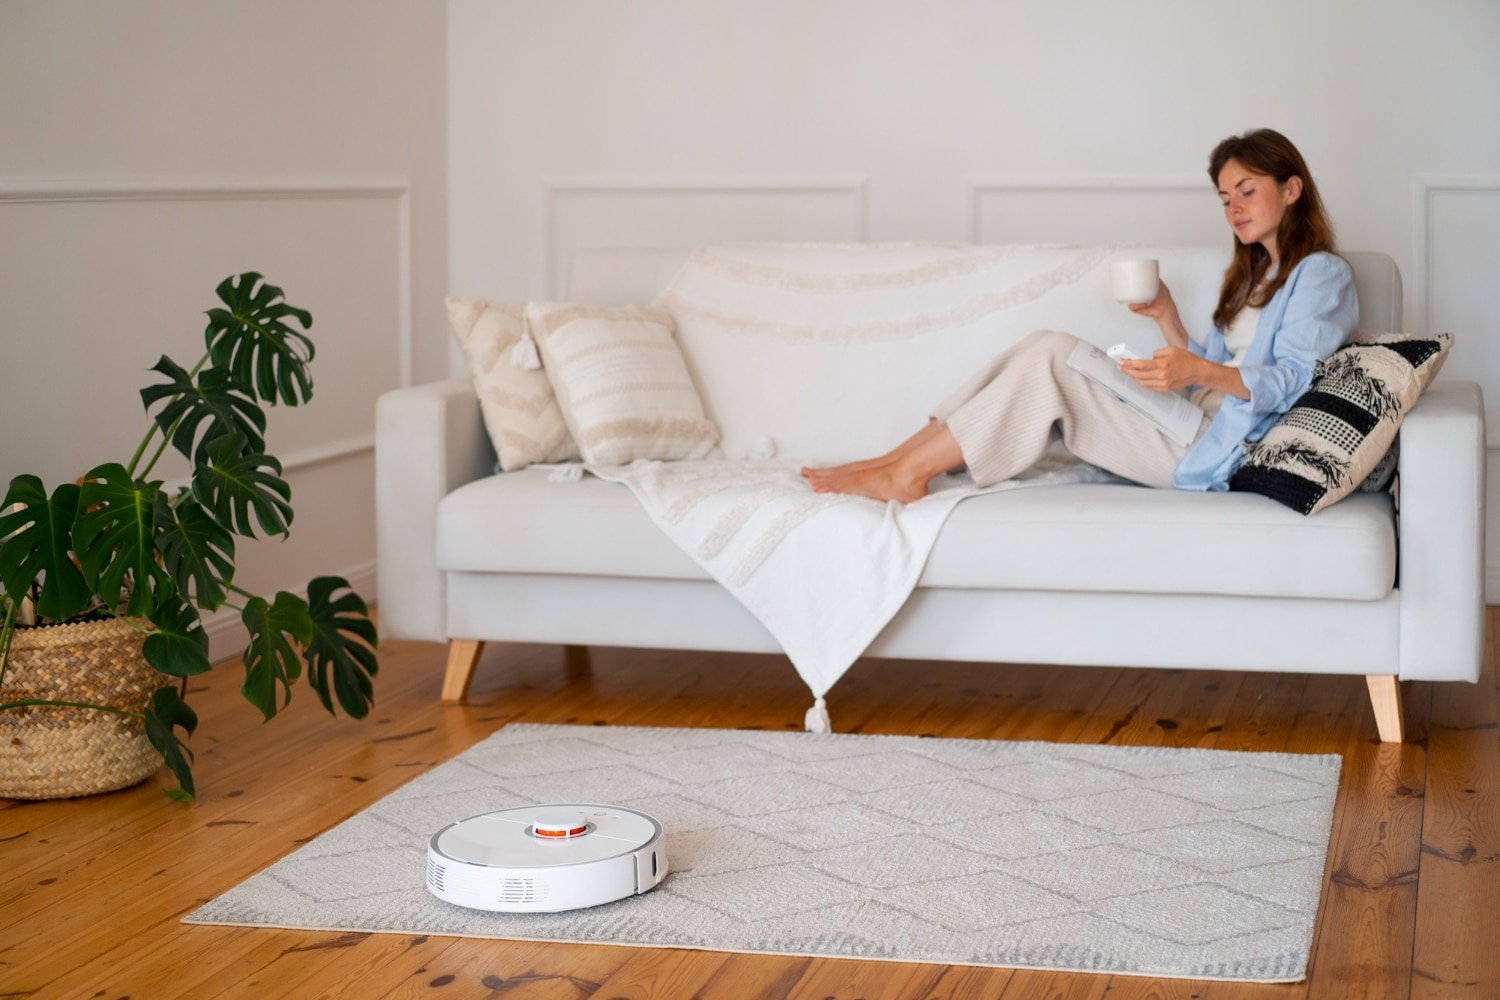 You are currently viewing Automate Your Home Cleaning With iRobot.com’s Robotic Vacuums